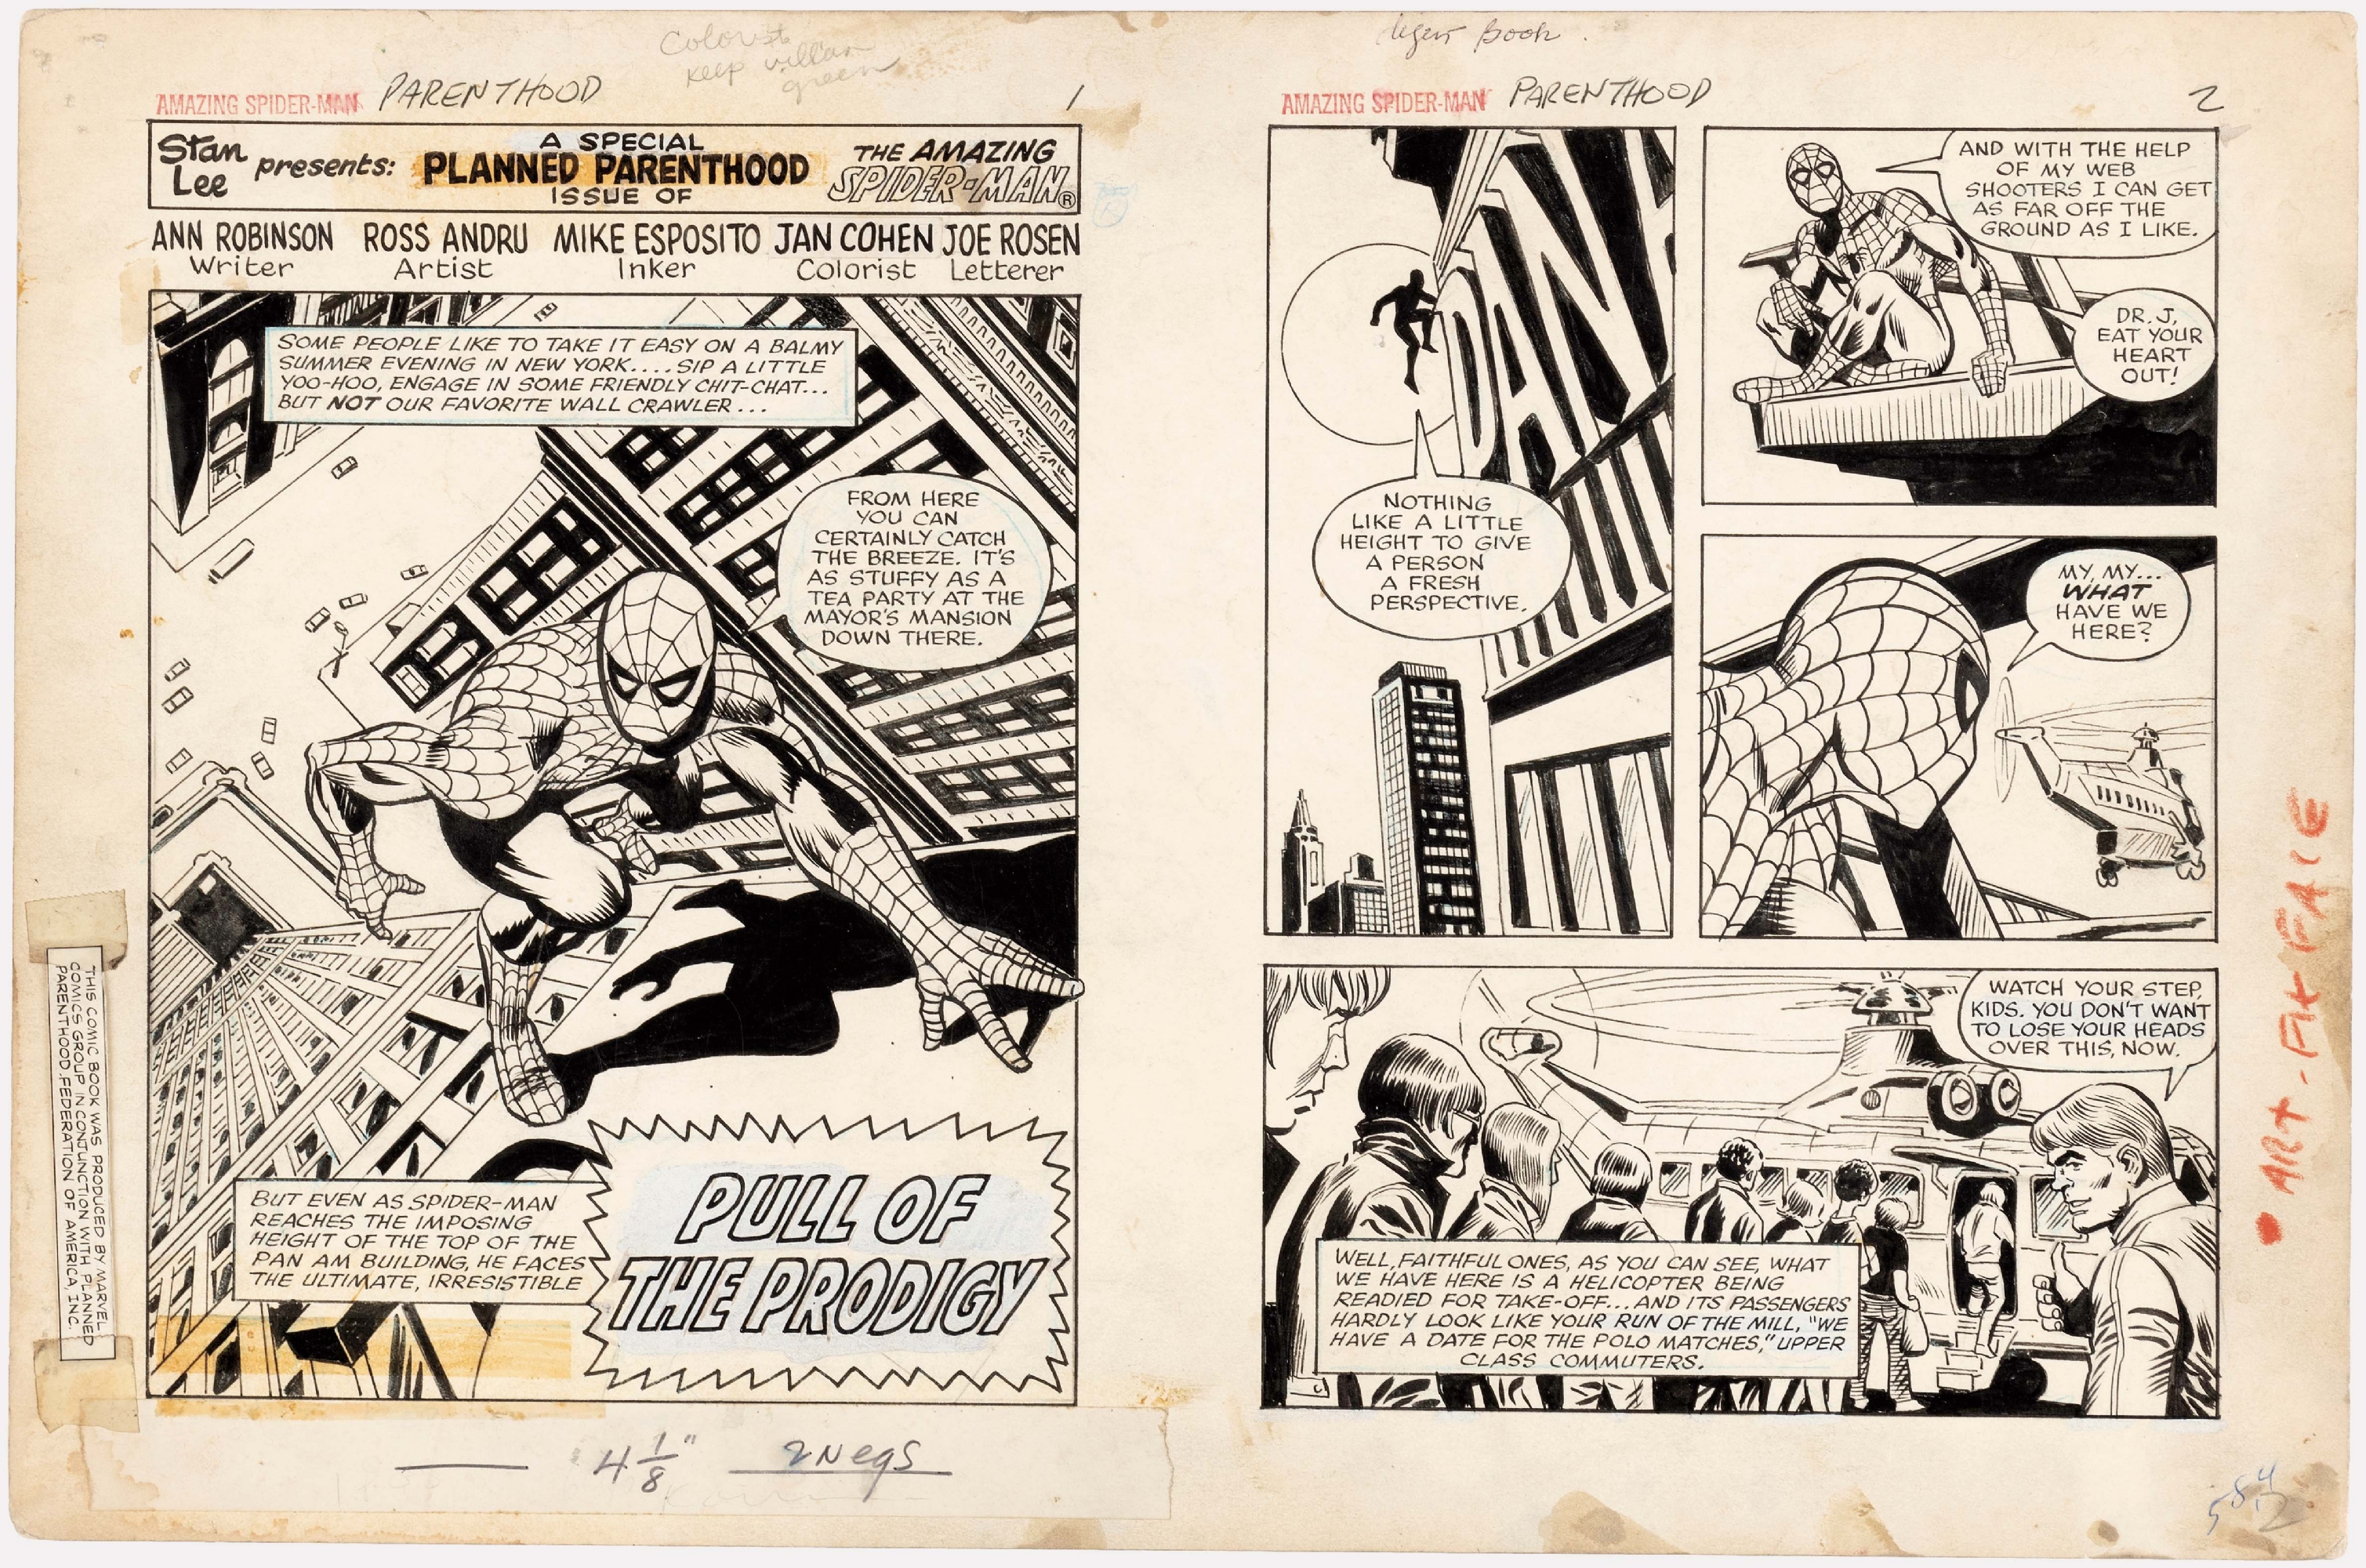 AMAZING SPIDER-MAN VS THE PRODIGY #1 COMPLETE STORY ORIGINAL ART BY ROSS ANDRU. Comic Art